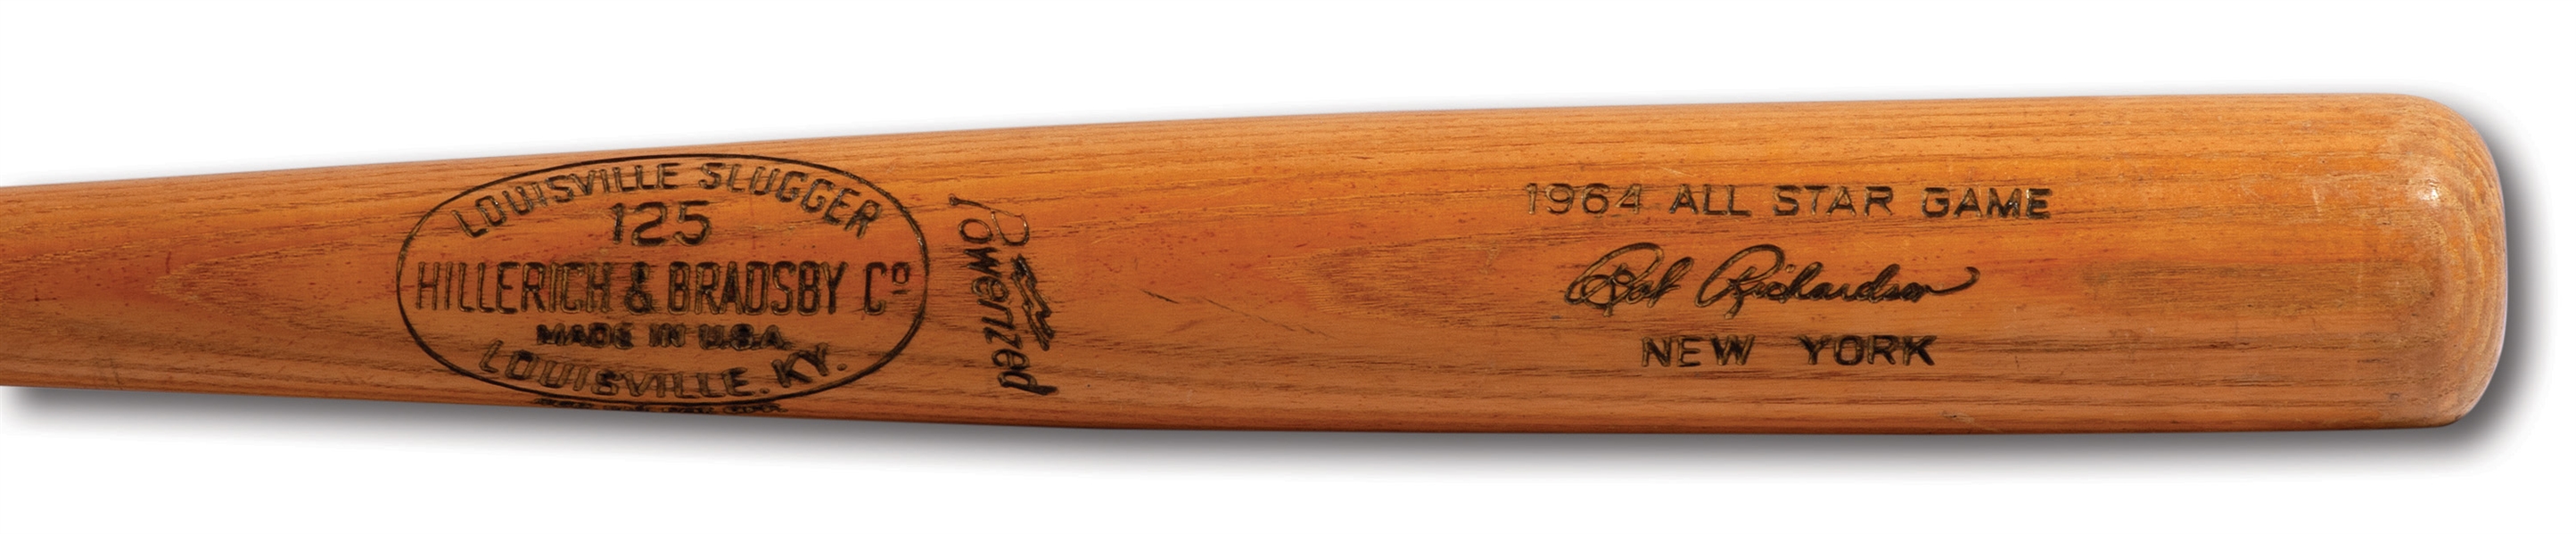 BOBBY RICHARDSON 1964 ALL-STAR GAME HILLERICH & BRADSBY PROFESSIONAL MODEL GAME ISSUED BAT